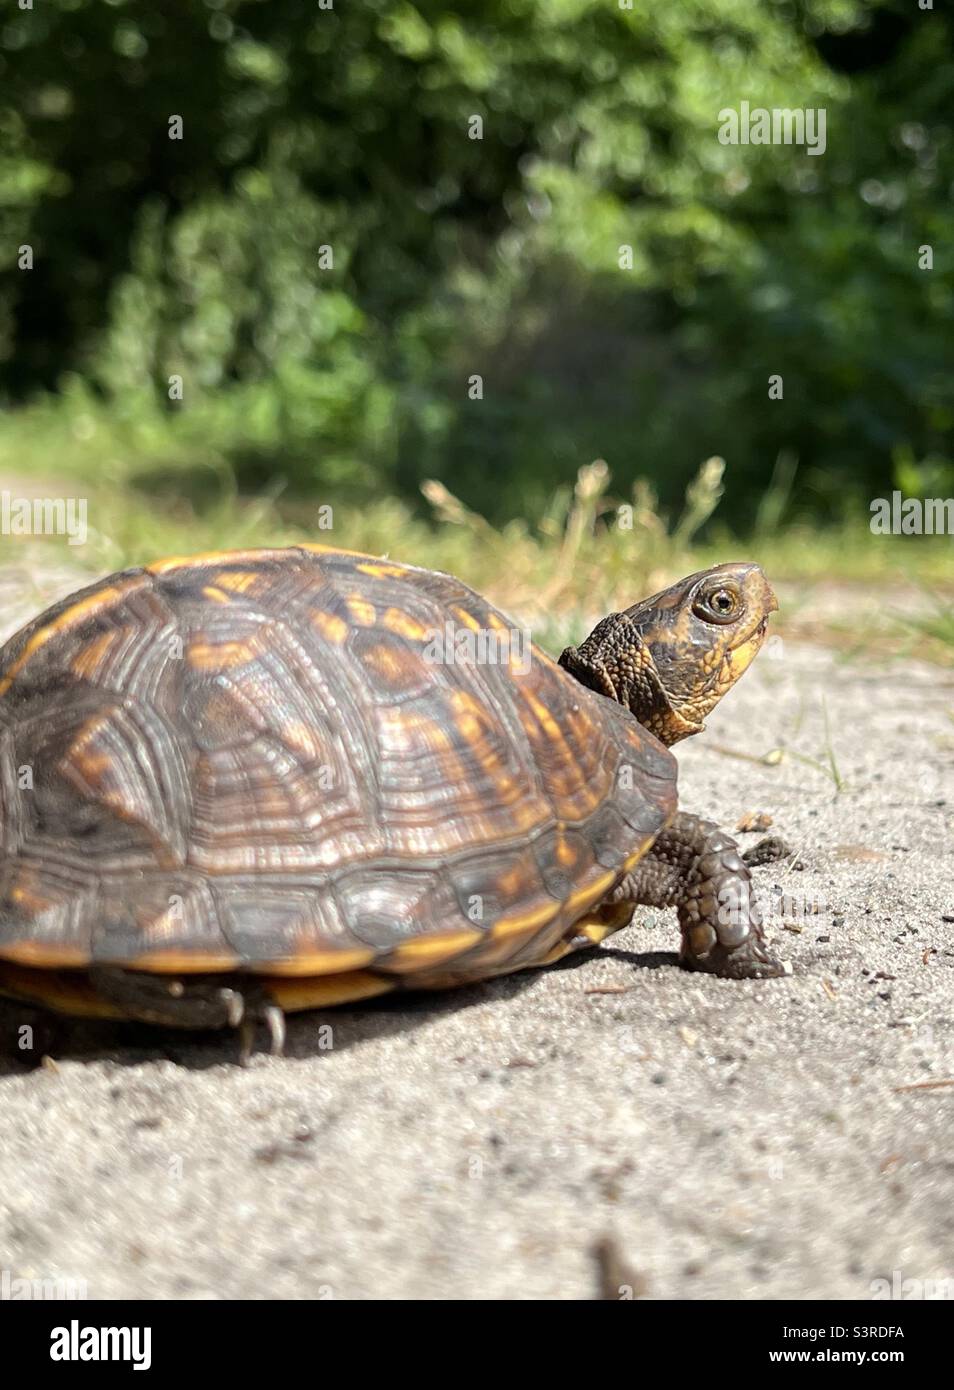 Young box turtle Stock Photo